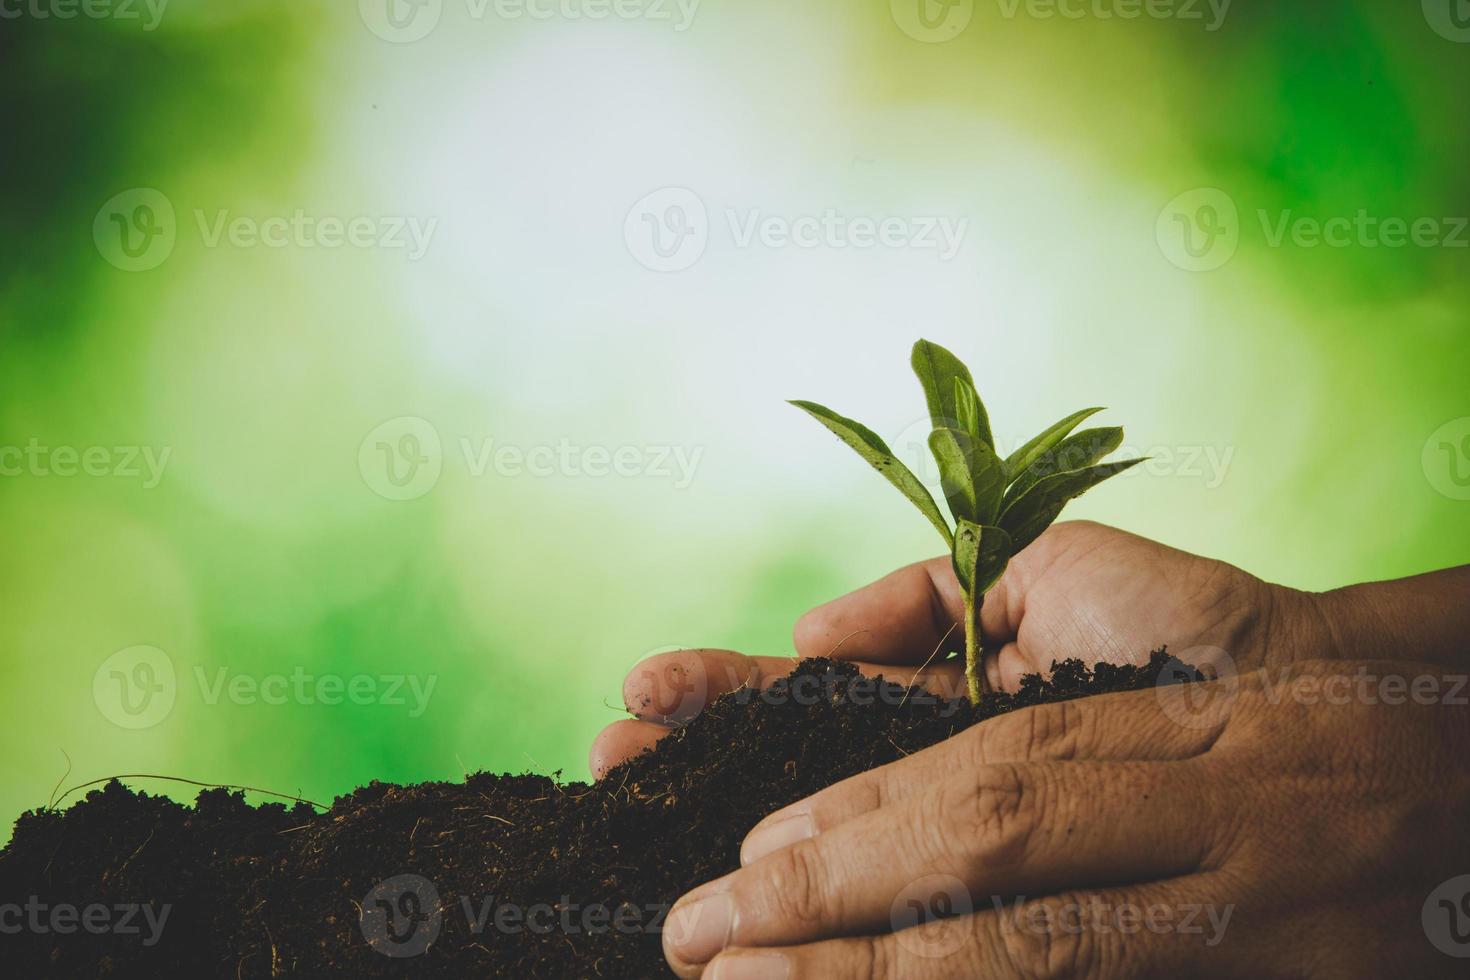 Dirty hands care plant trees in the earth on world environment day. Young small green new life growth on soil in ecology nature. Human person grow seedlings and protect in garden. agriculture concept photo